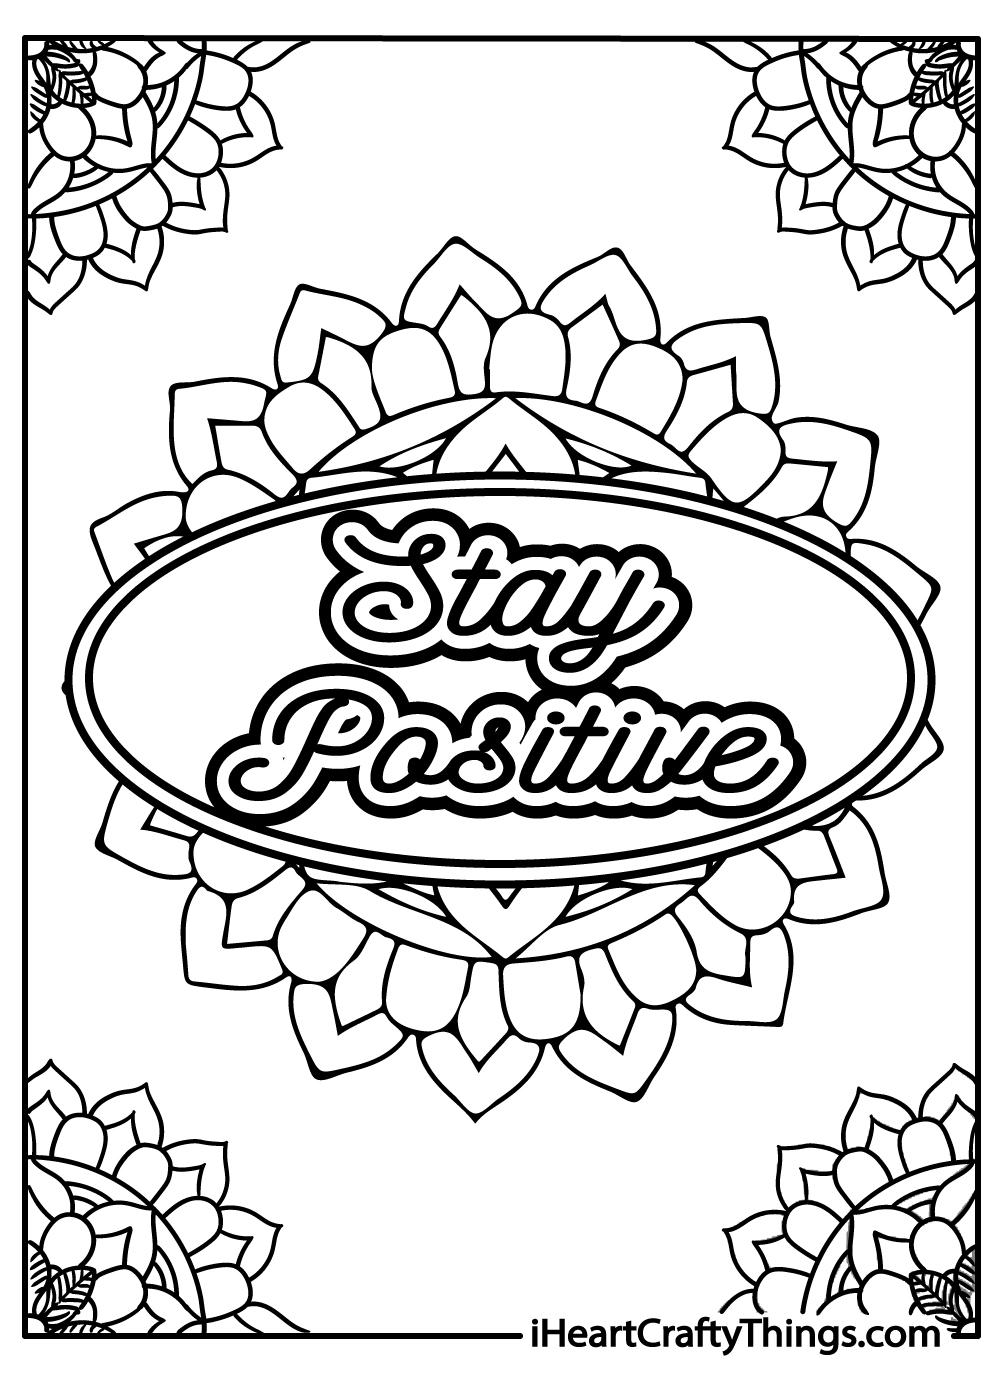 stay positive coloring pages